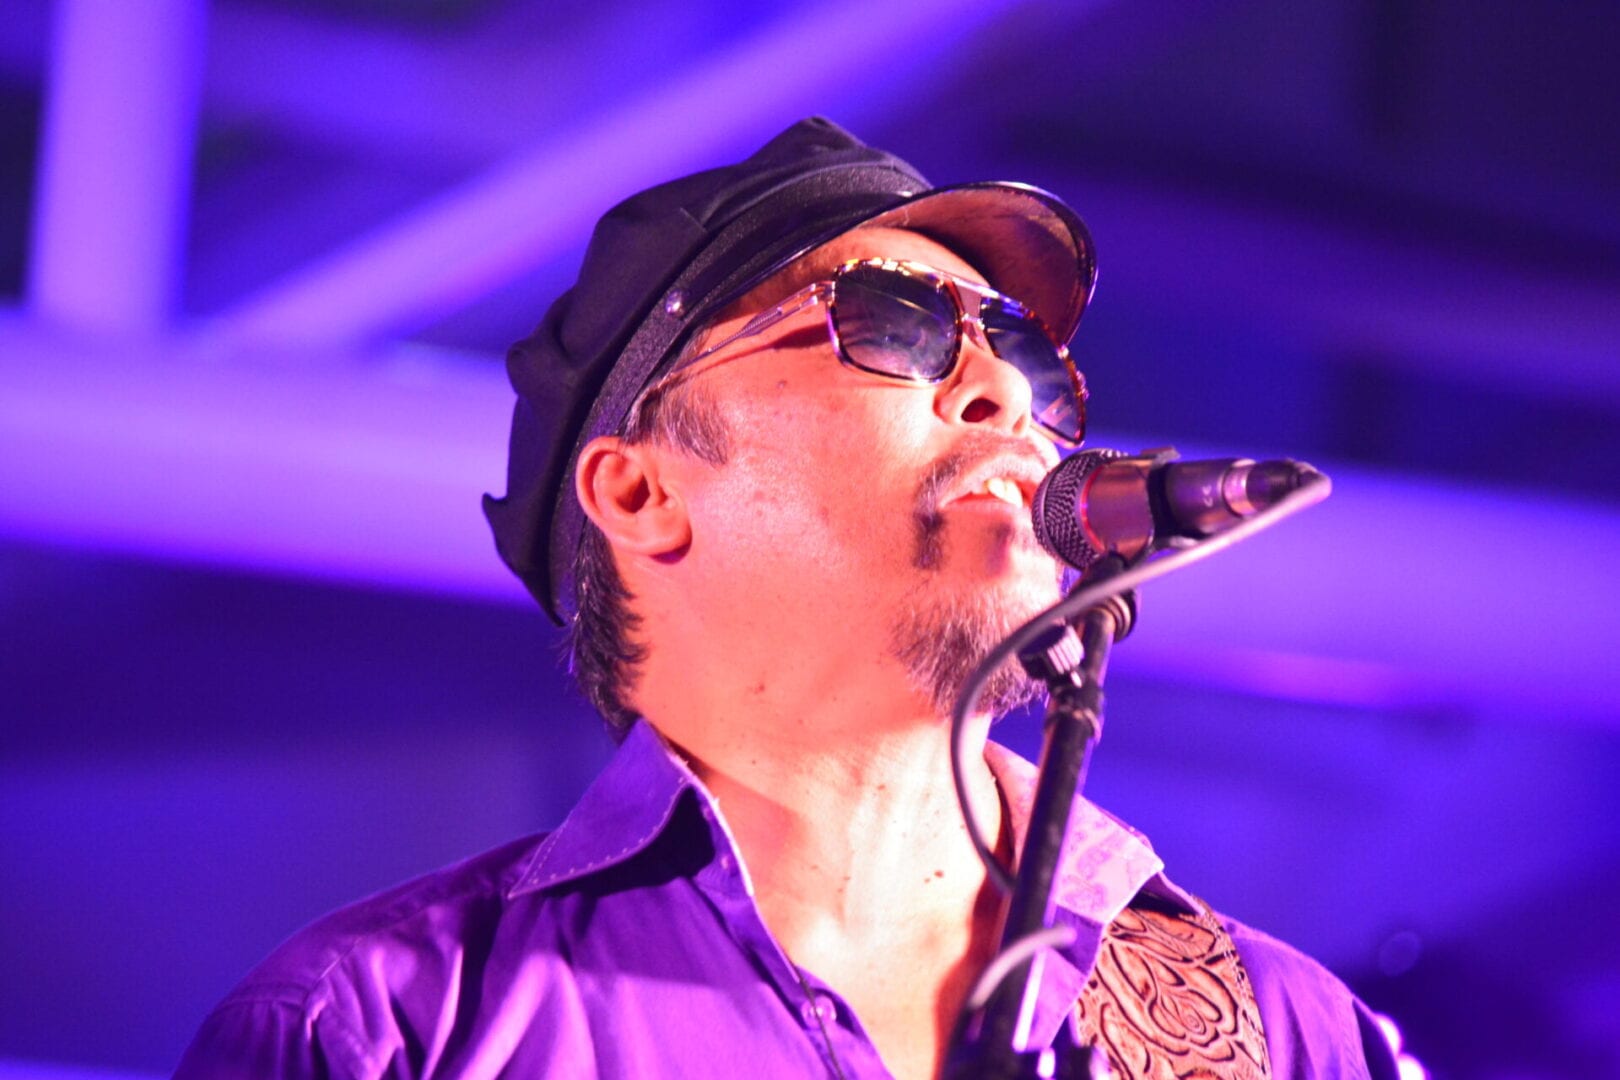 A man in purple shirt and hat singing into microphone.